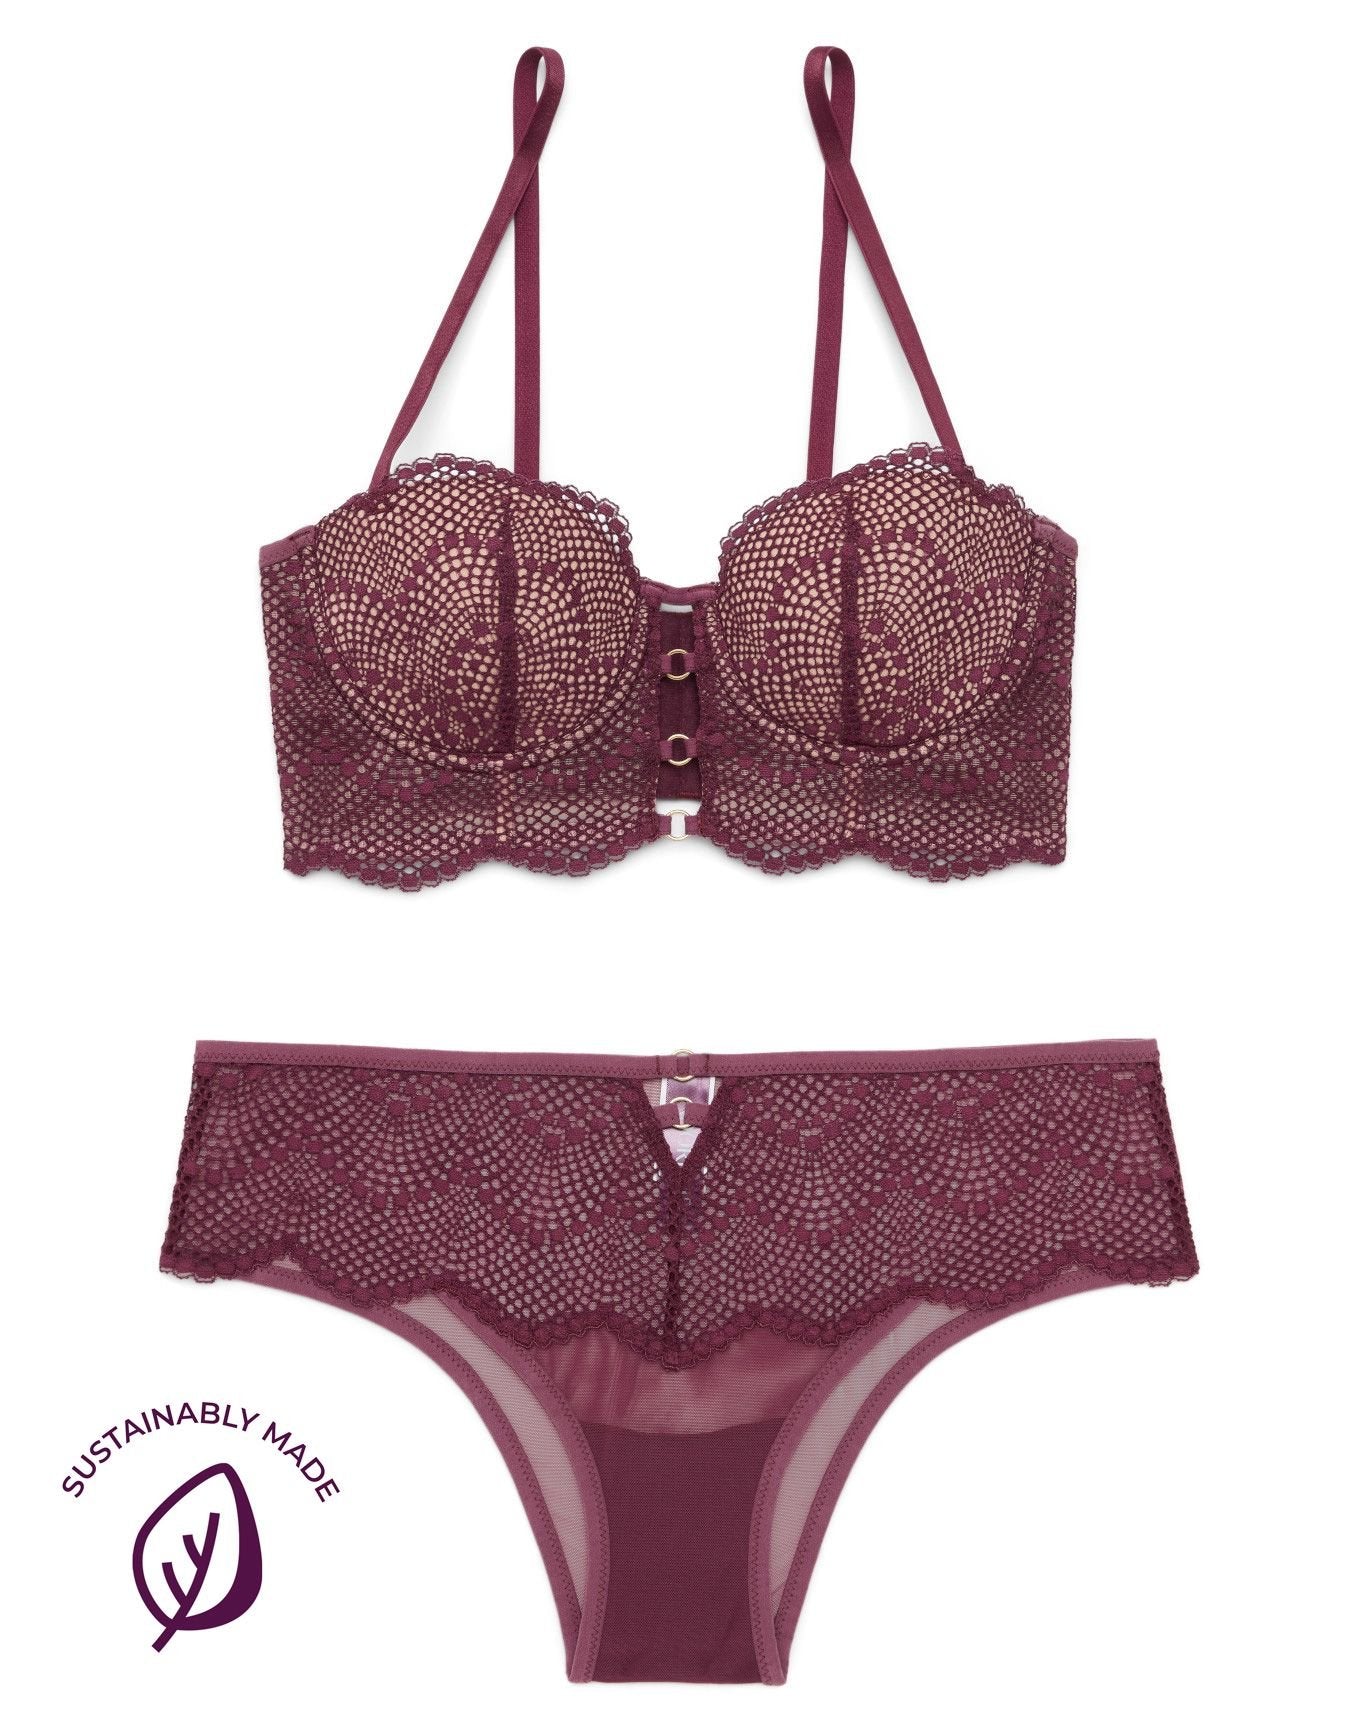 Adore Me Margaritte Push-Up Balconette in color Grape Wine and shape balconette